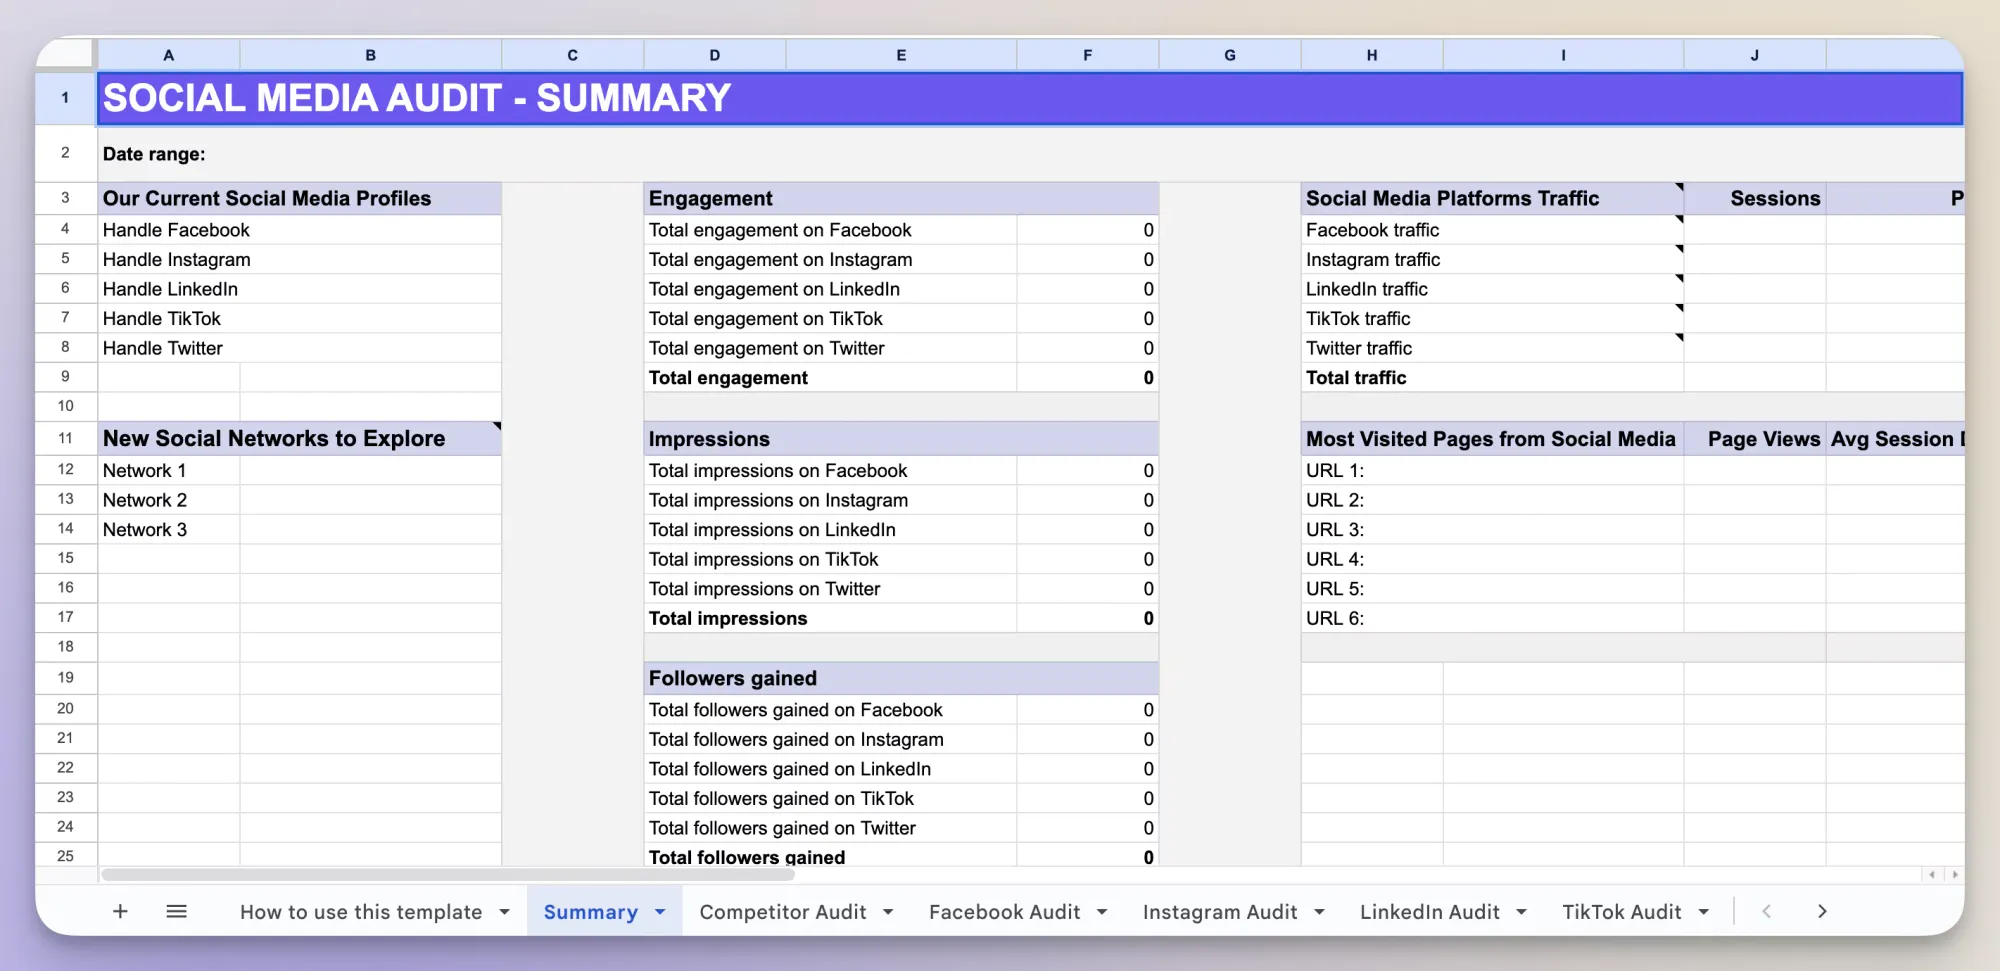 Get this FREE social media audit template